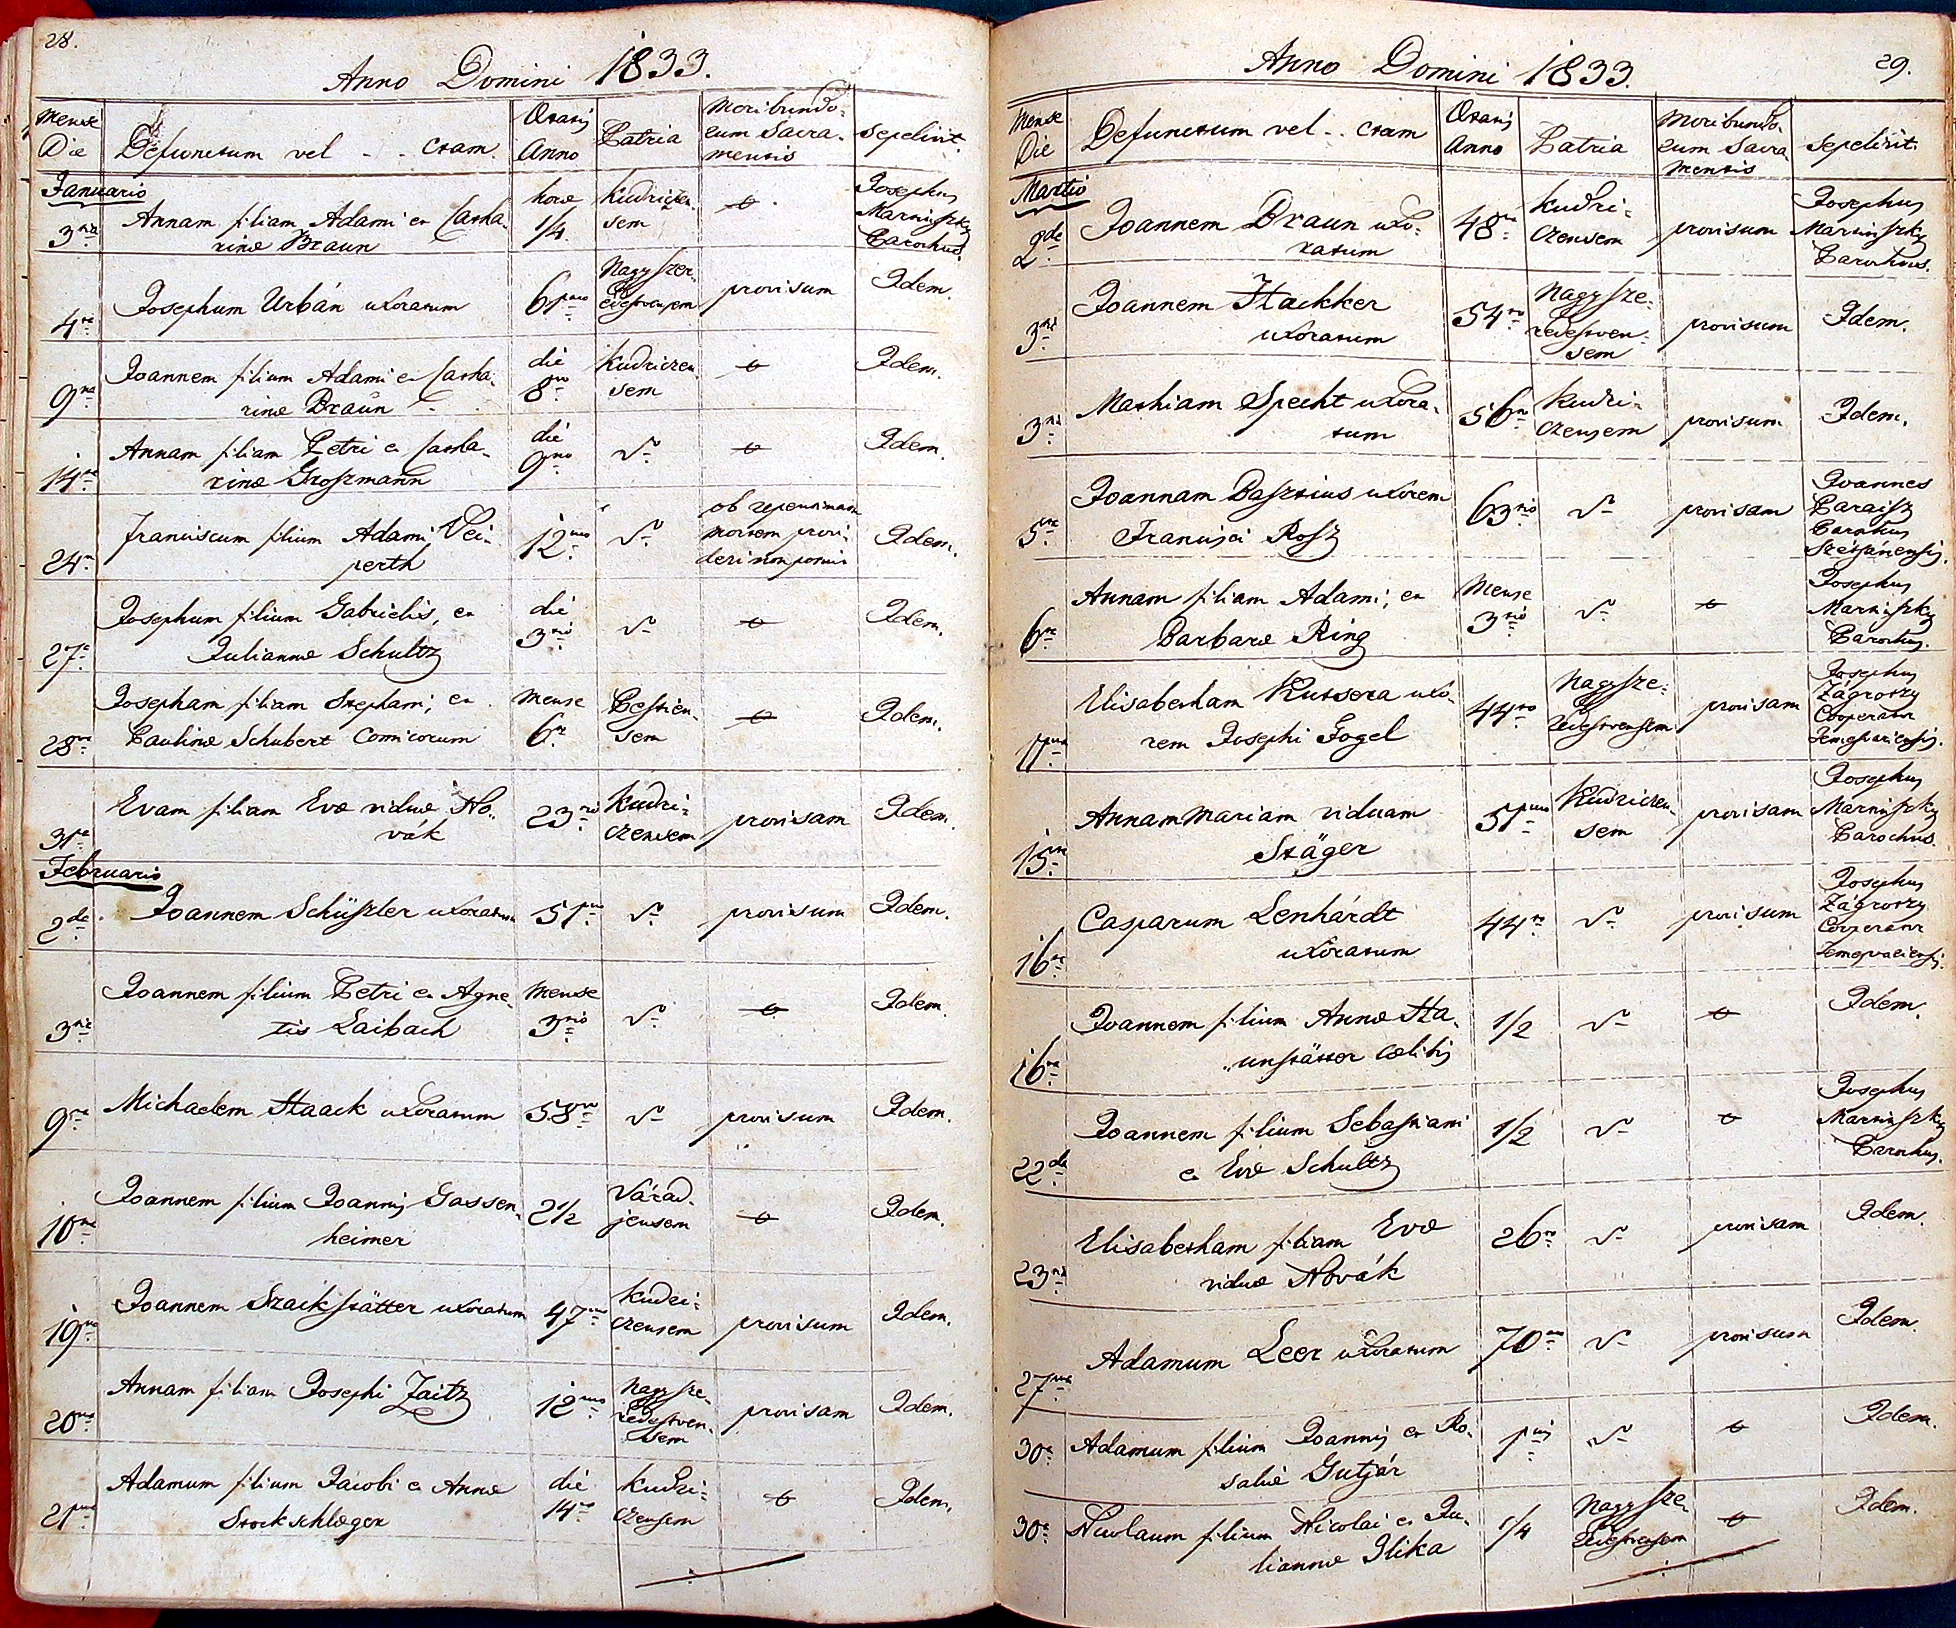 images/church_records/DEATHS/1829-1851D/028 i 029